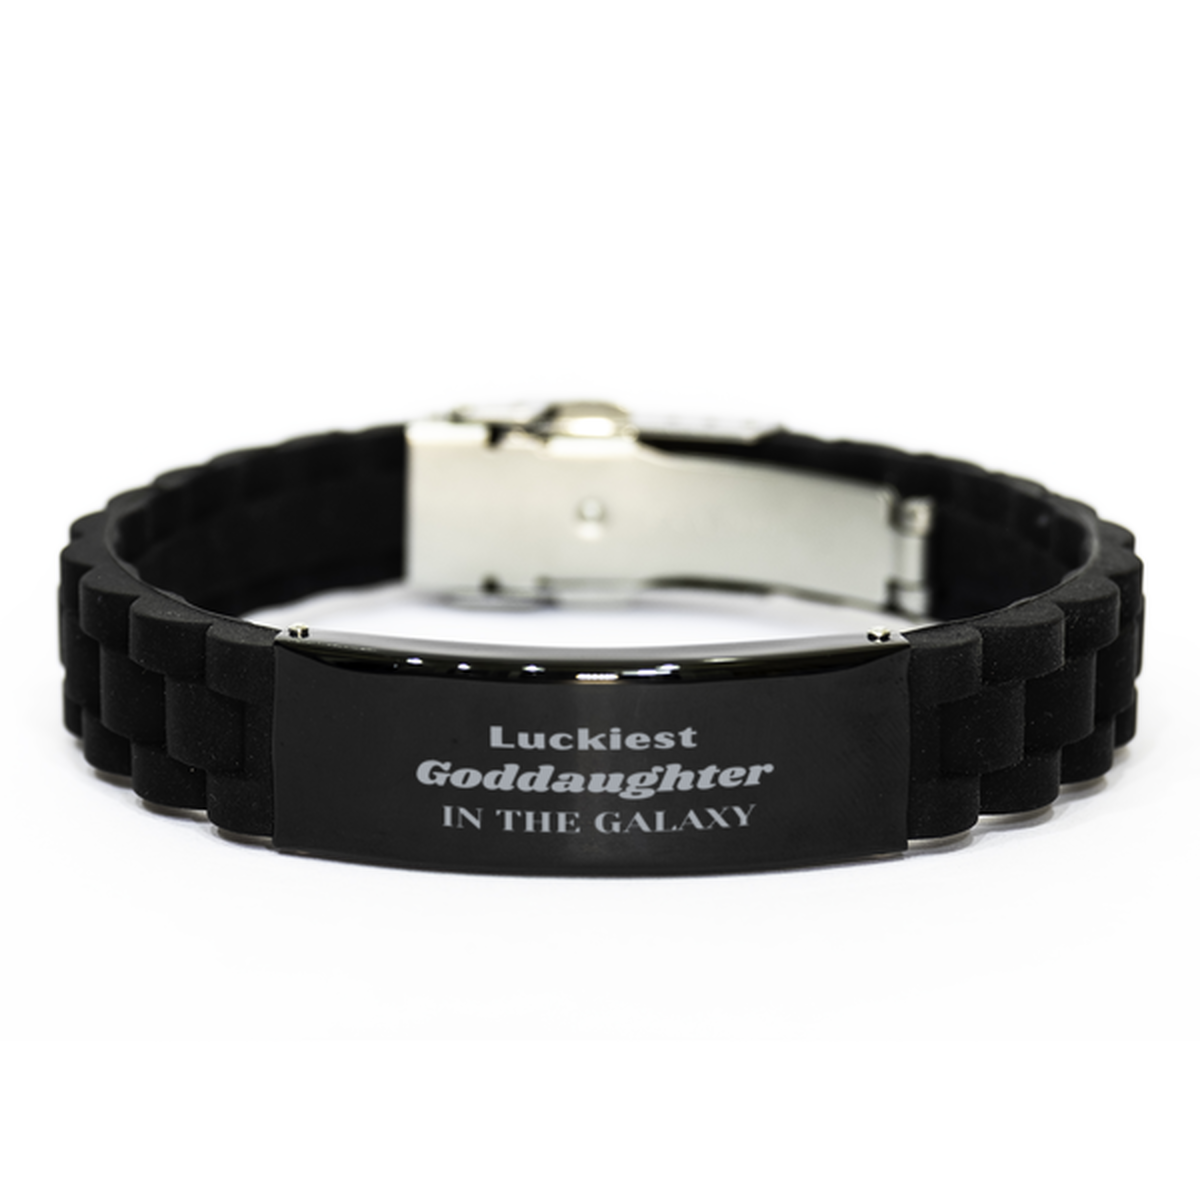 Luckiest Goddaughter in the Galaxy, To My Goddaughter Engraved Gifts, Christmas Goddaughter Black Glidelock Clasp Bracelet Gifts, X-mas Birthday Unique Gifts For Goddaughter Men Women